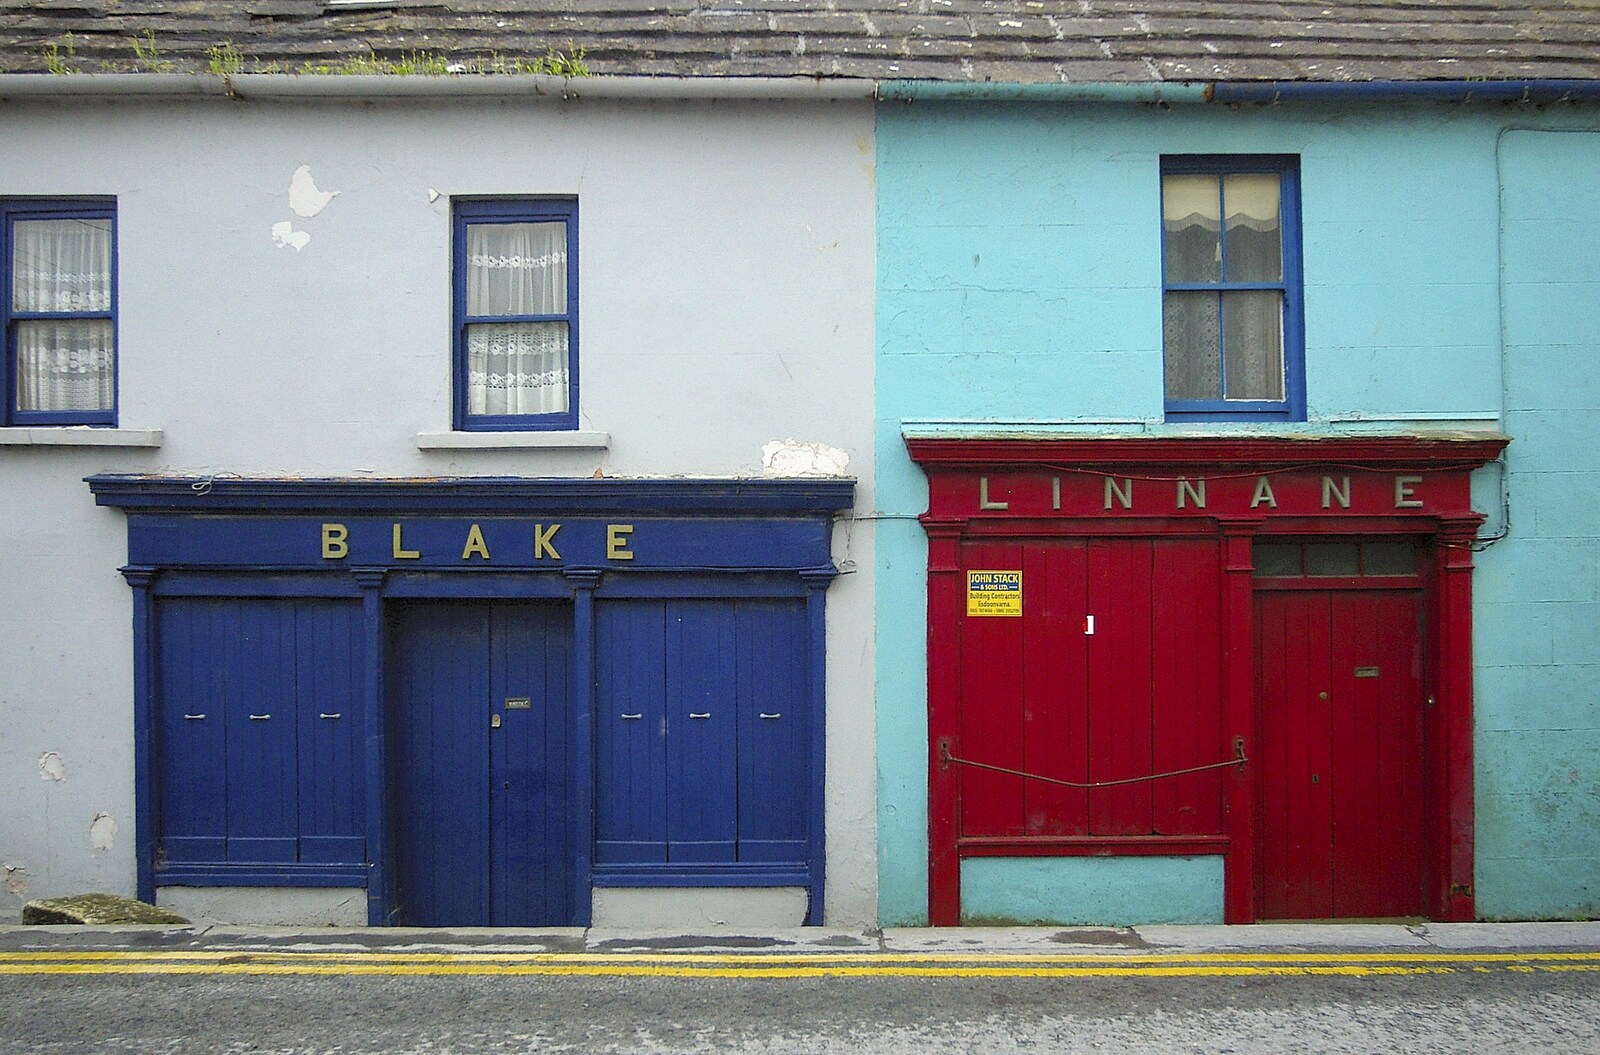 Blake and Linnane: two closed shops in Ennistymon from Corofin, Ennistymon and The Burran, County Clare, Western Ireland - 27th October 2006